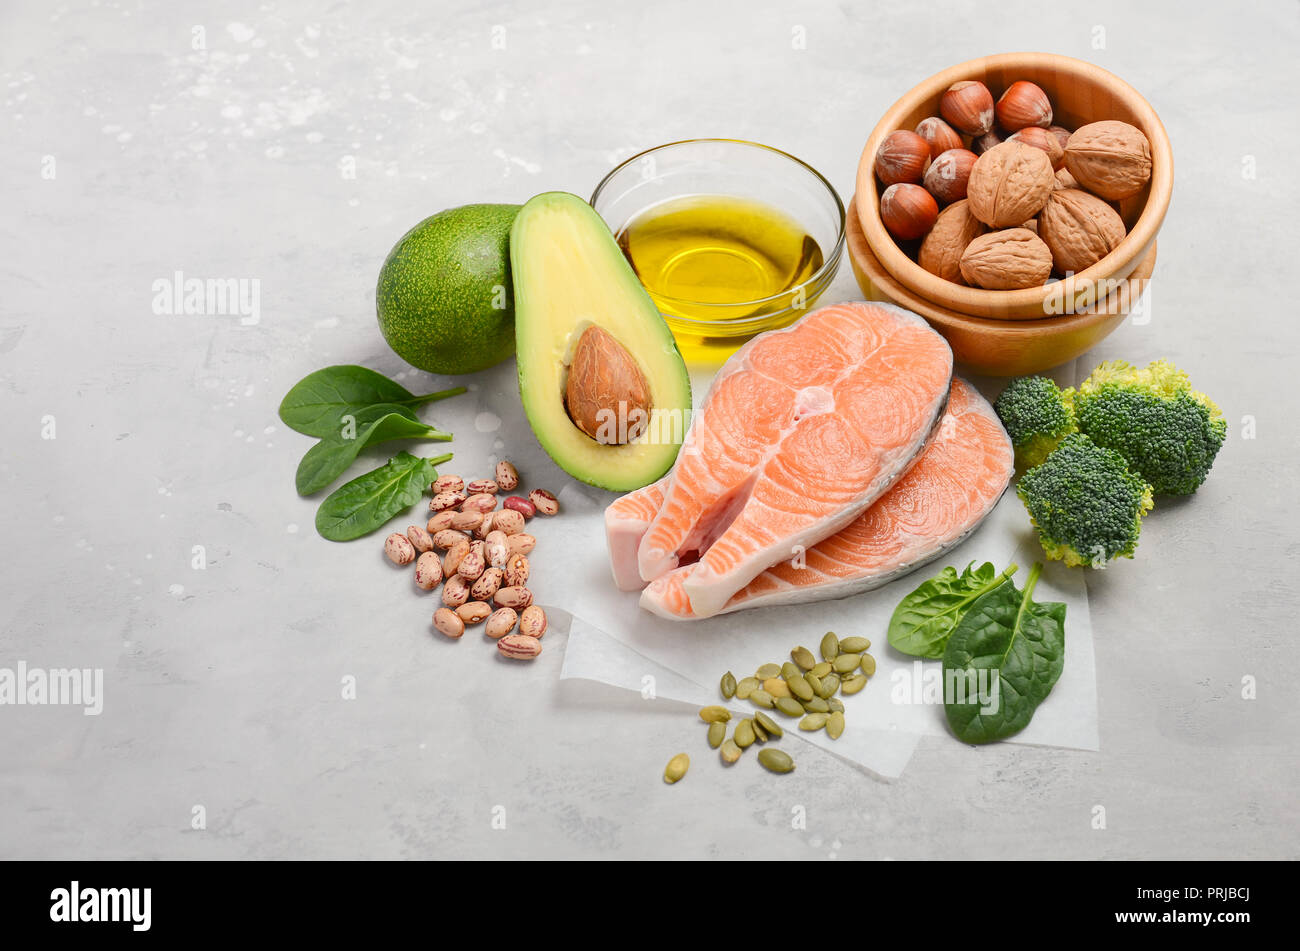 Selection of healthy products. Balanced diet concept. Stock Photo